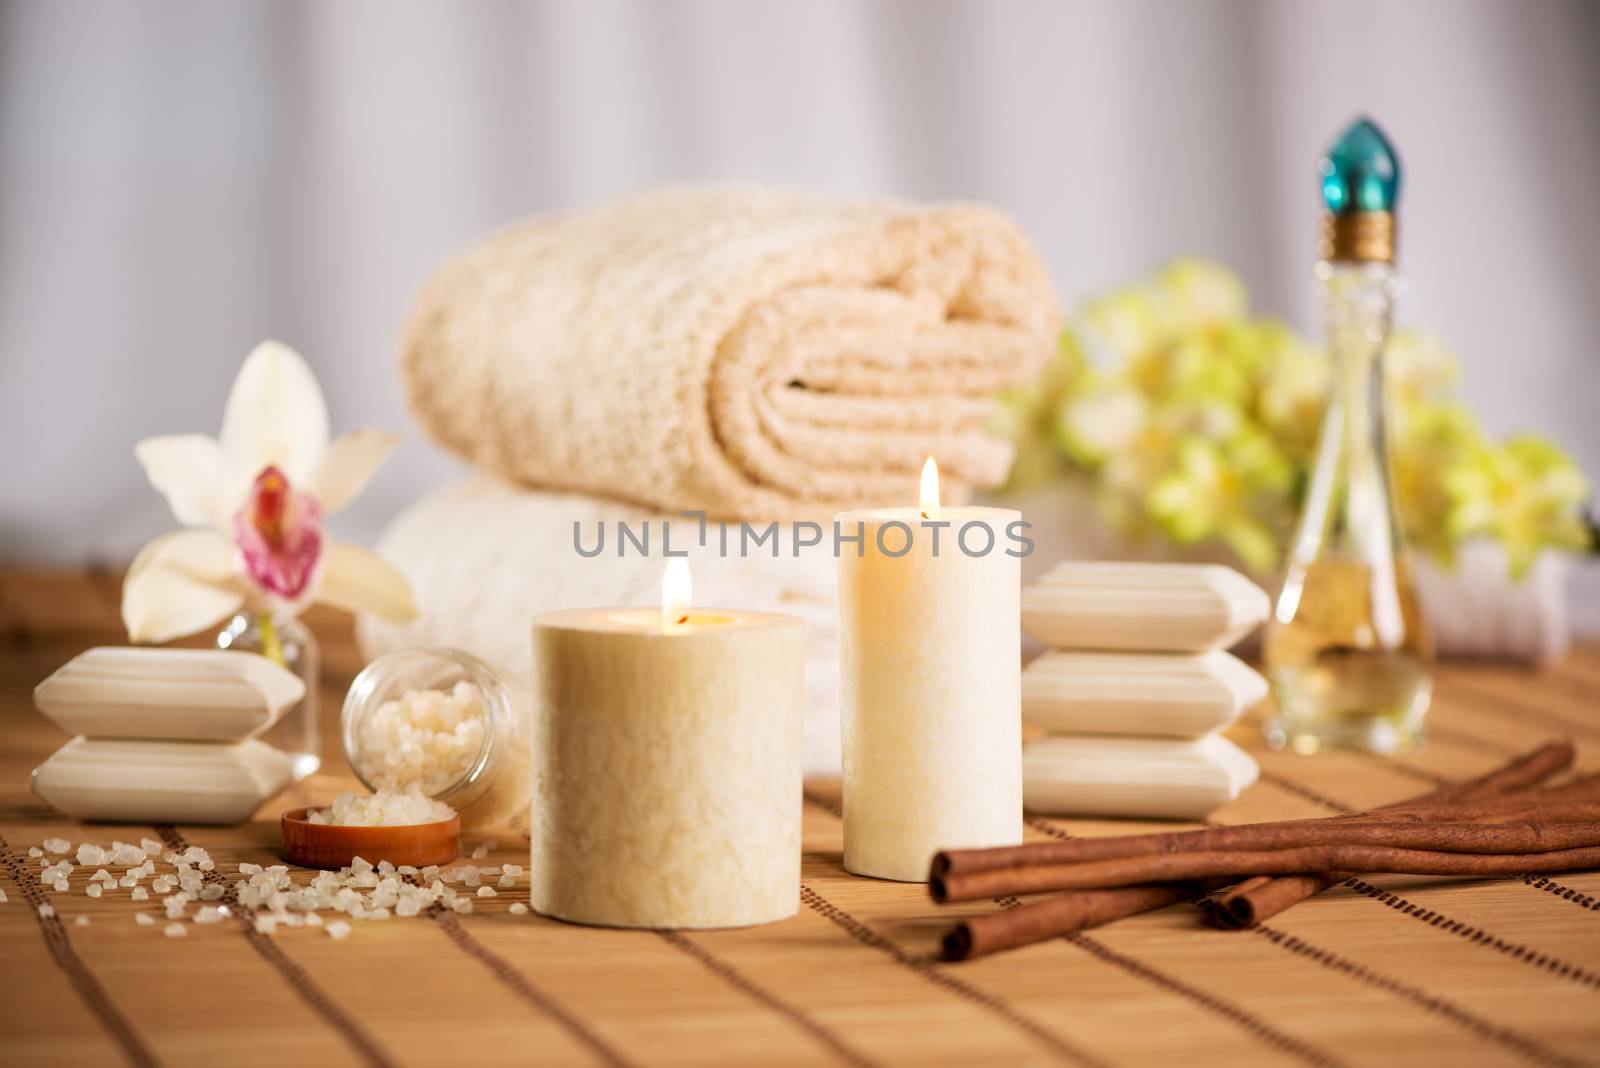 Towel, aromatic candles and other spa objects to free your mind.